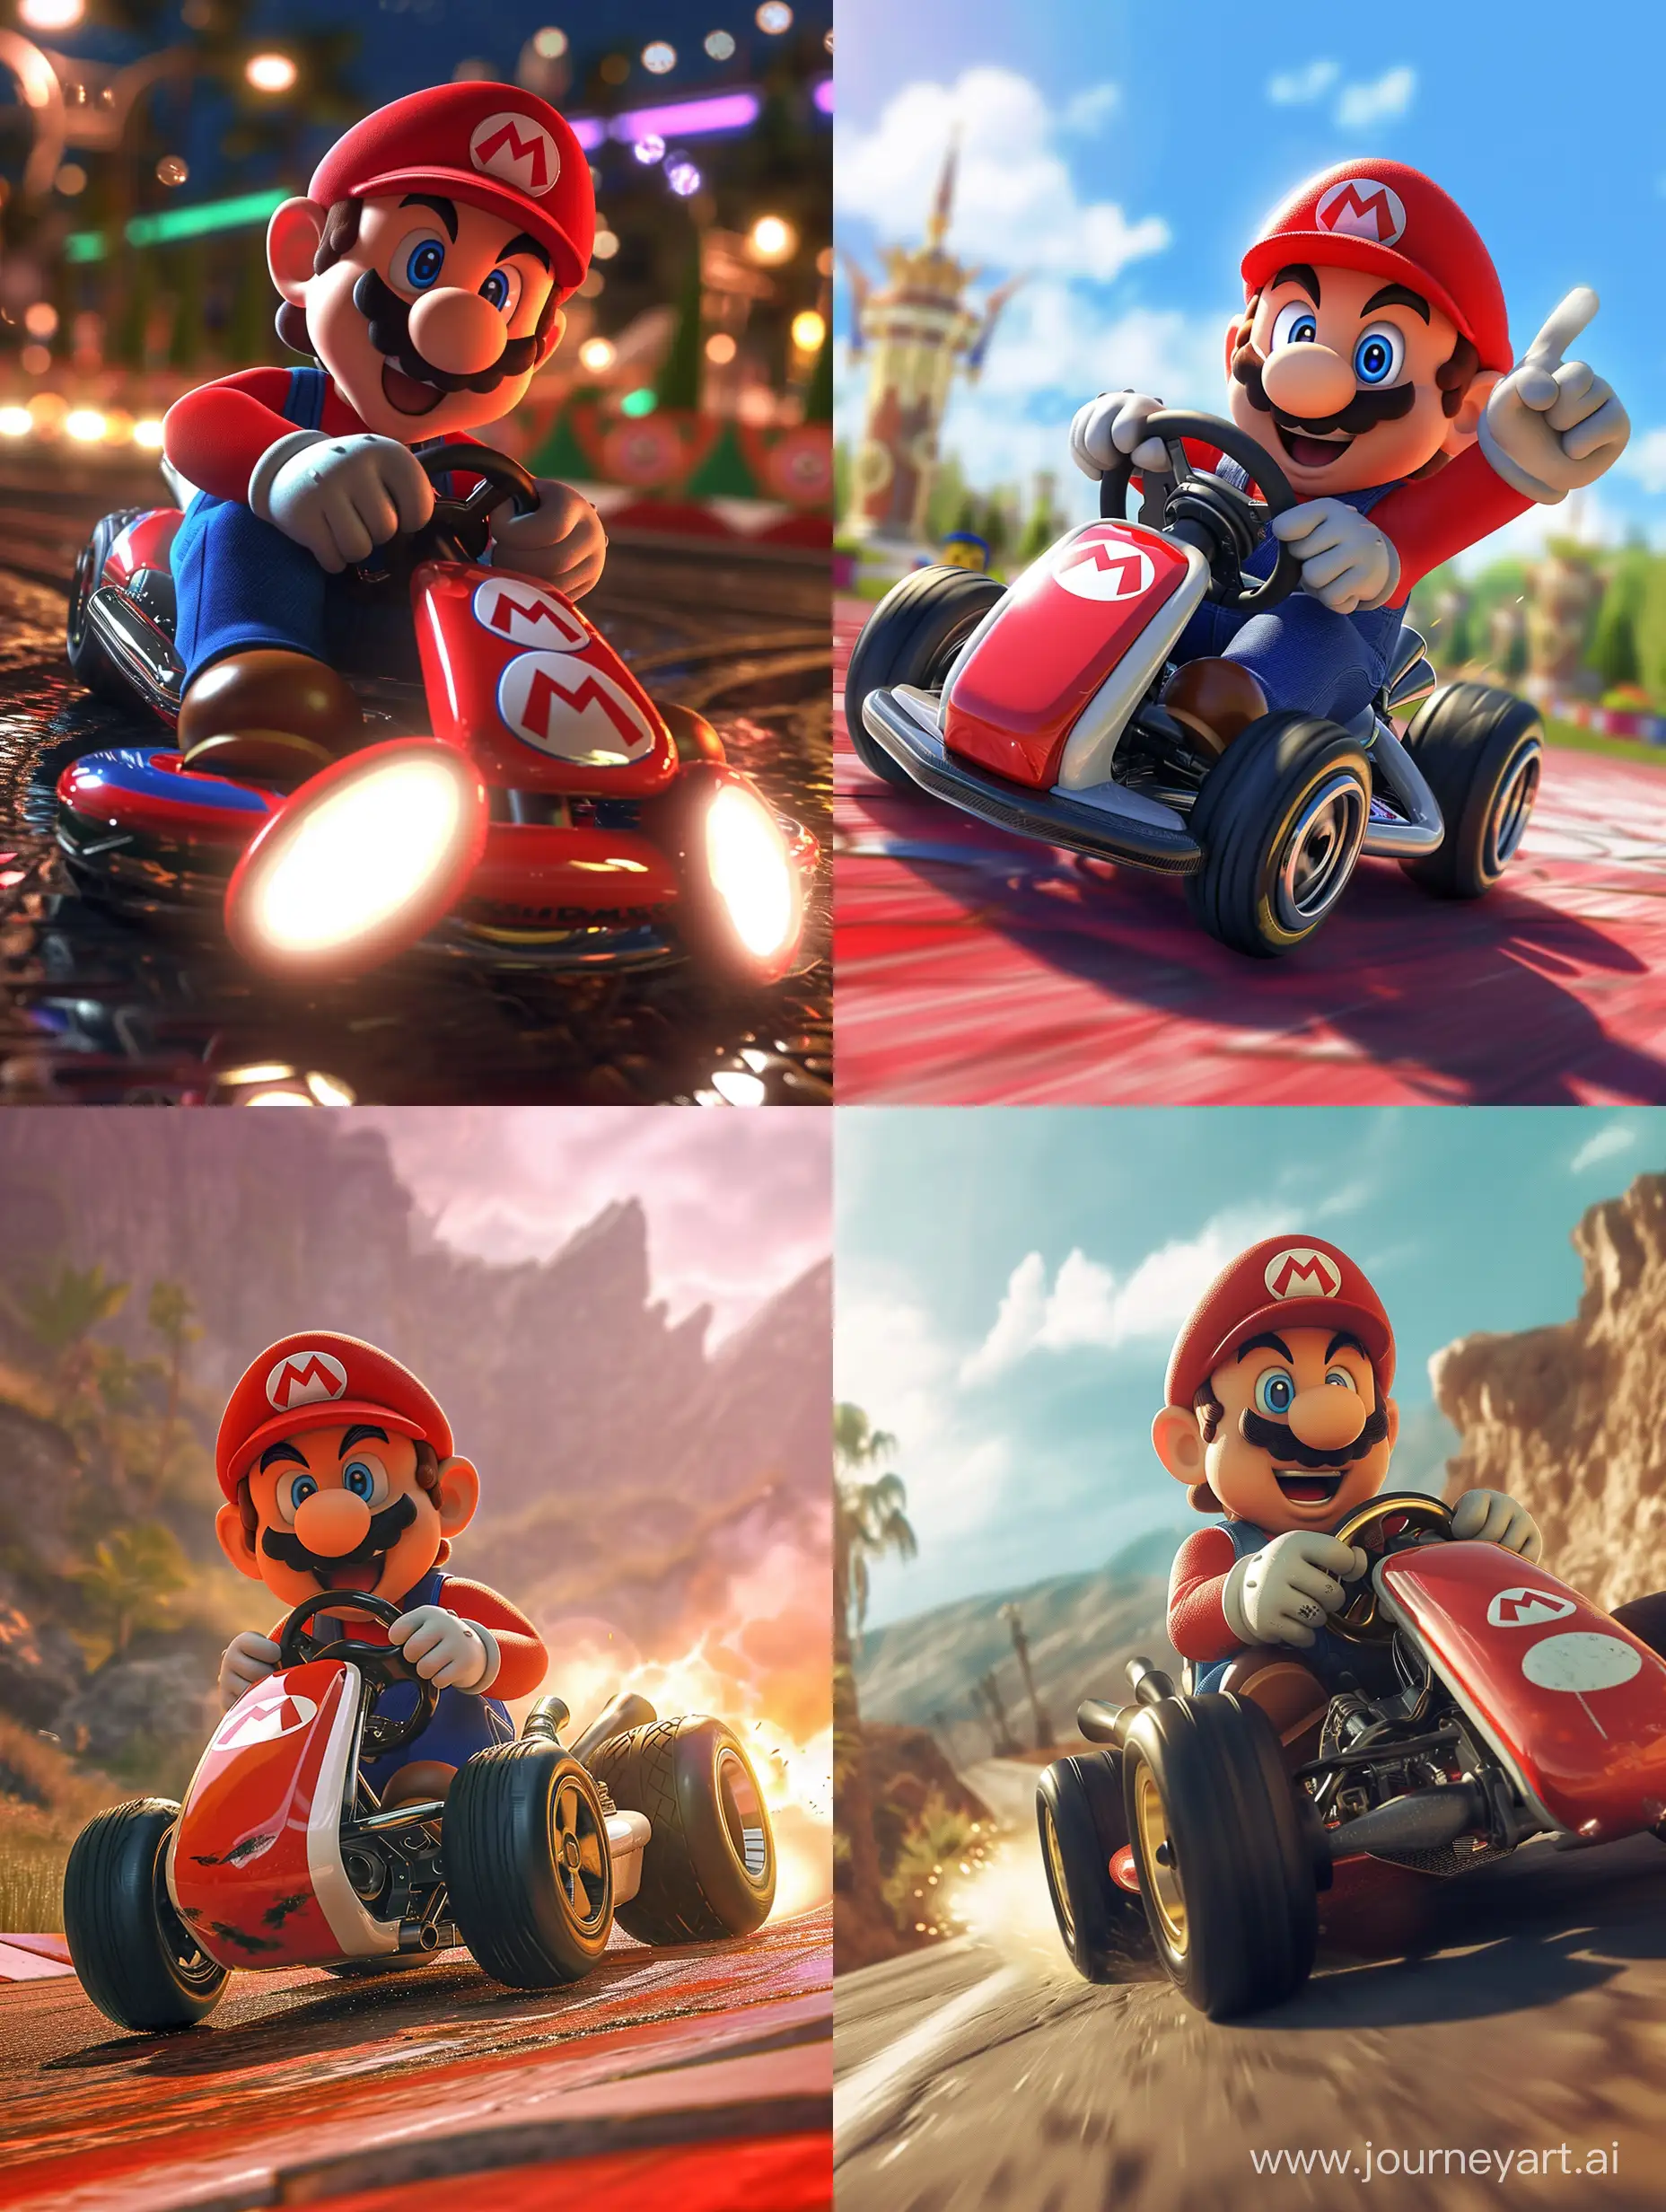 A picture of Mario Kart 8 inspired by Studio Ghibli Art Style